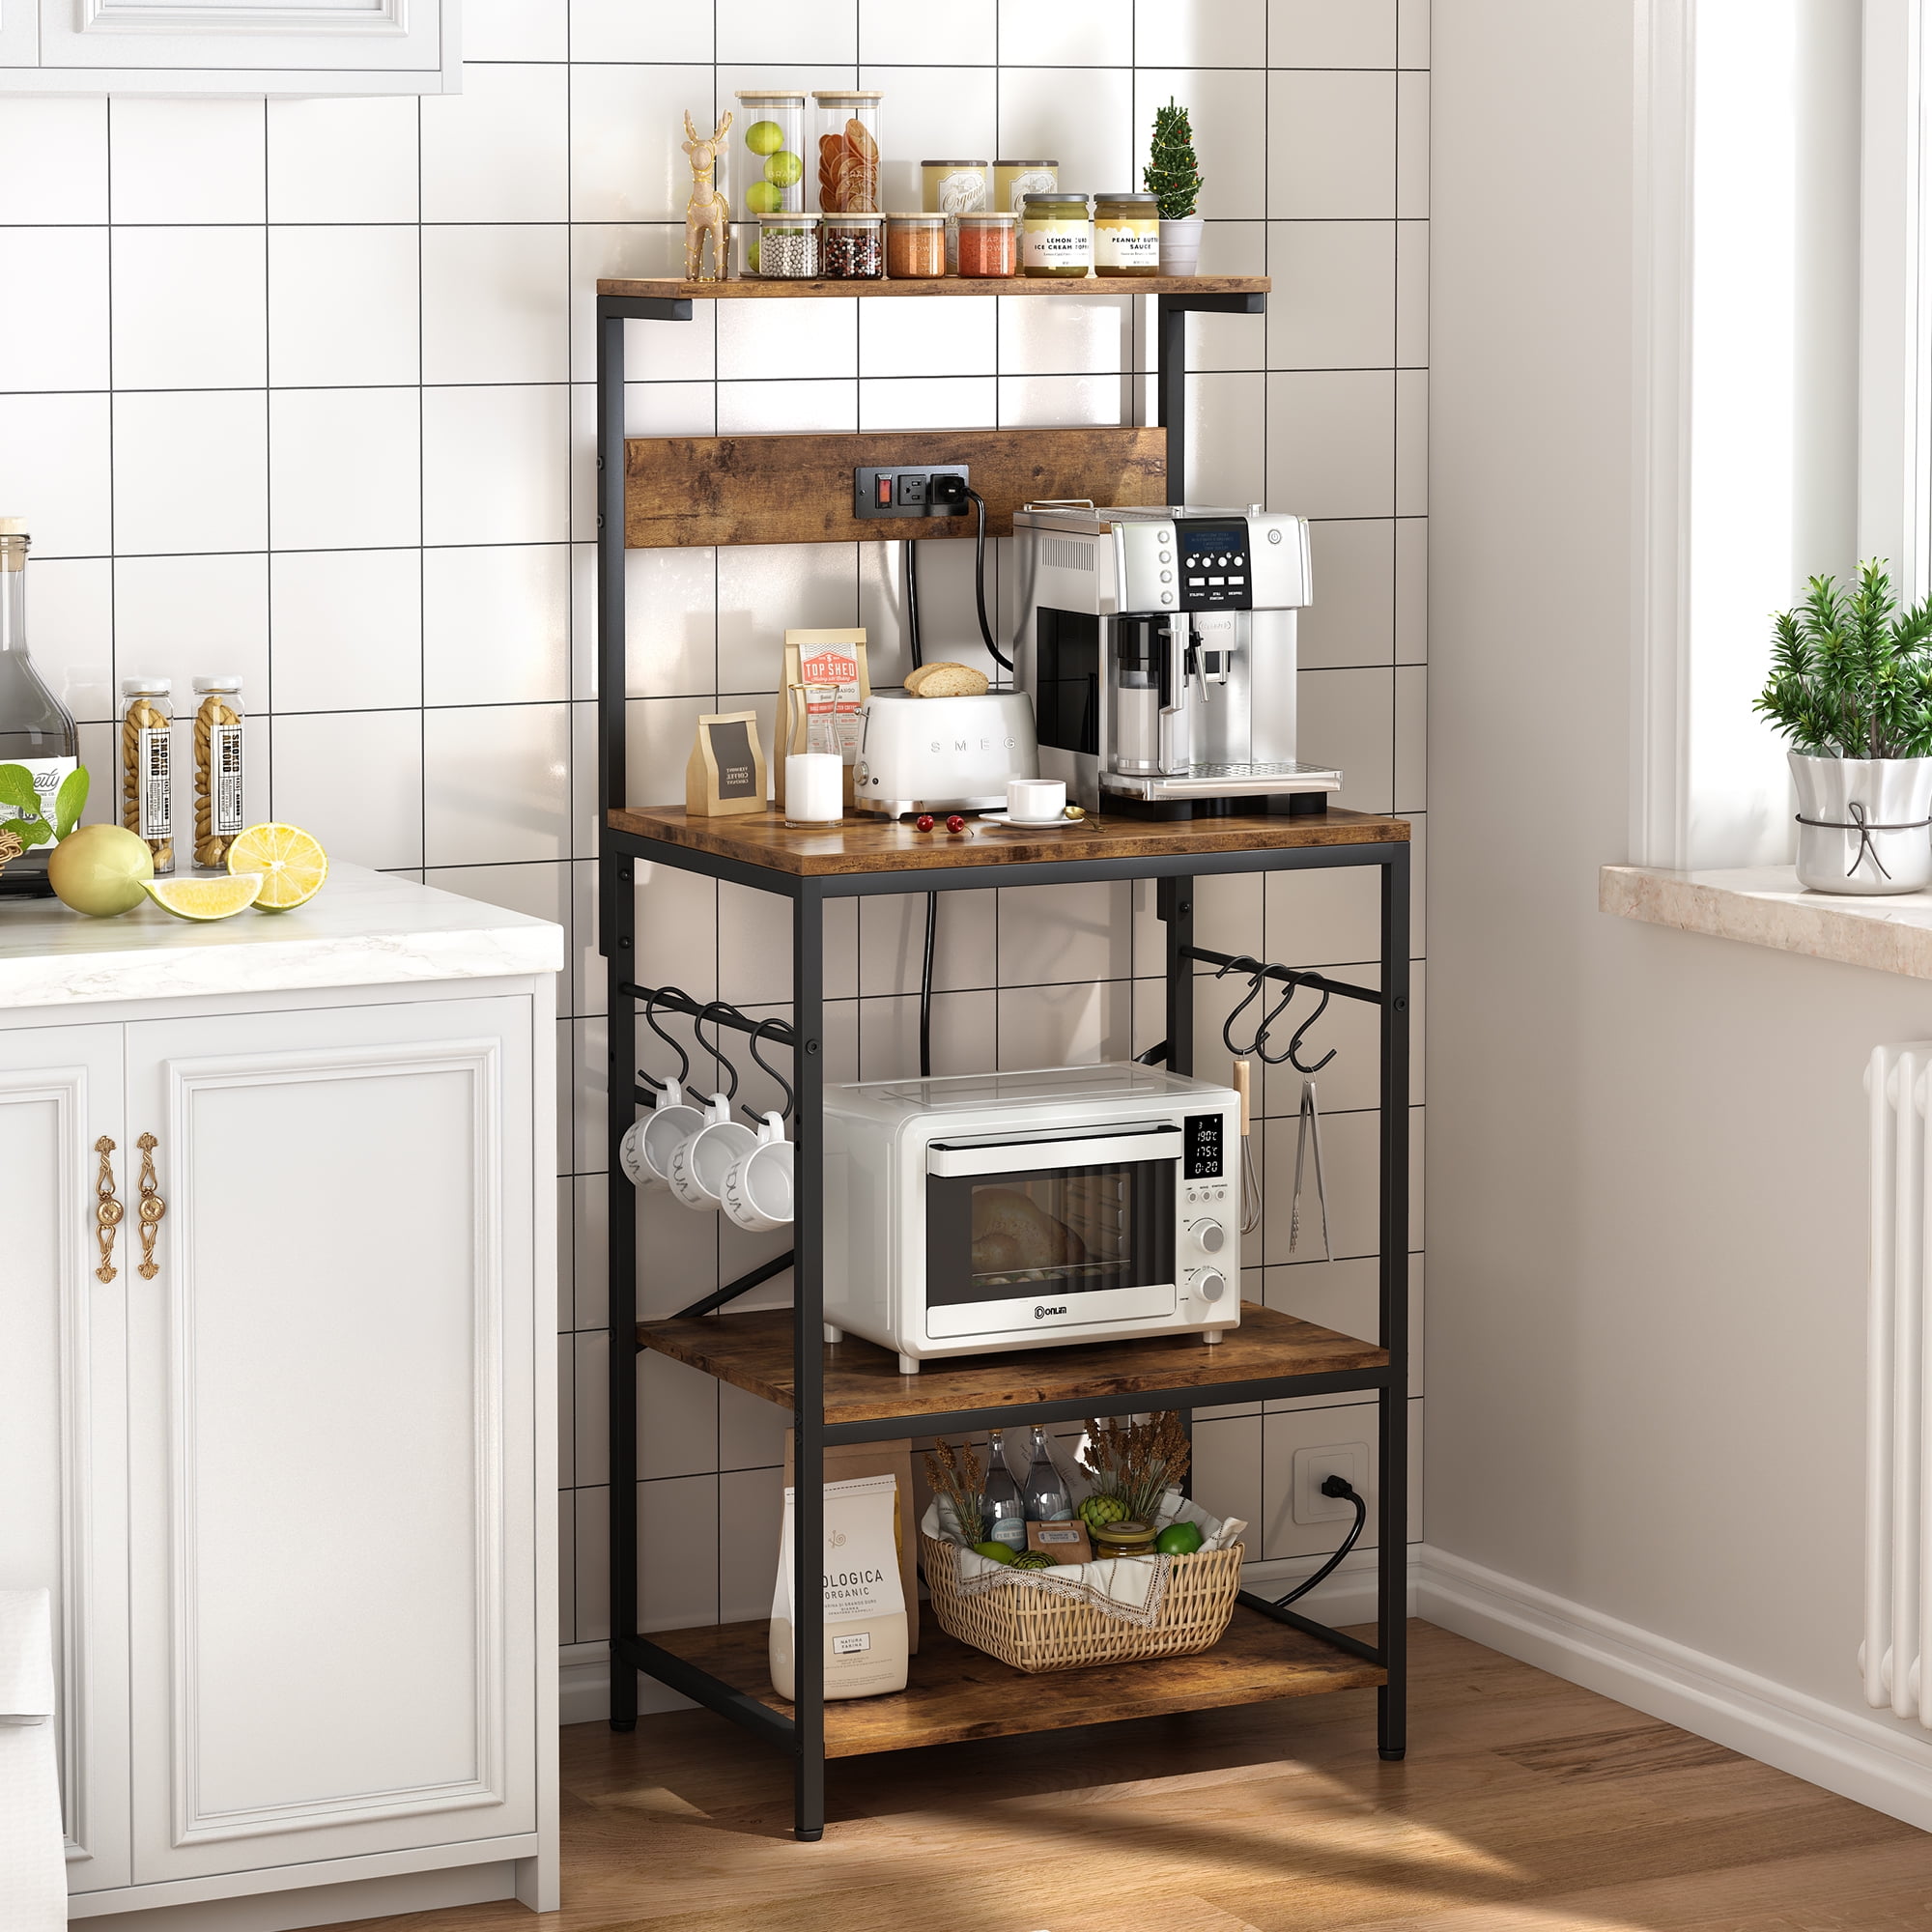 Kitchen Storage Cabinets Kitchen Bakers Racks with Storage Holder on Wheel  Table Microwave Oven Stand Storage Cart with Wire Basket Metal Frame